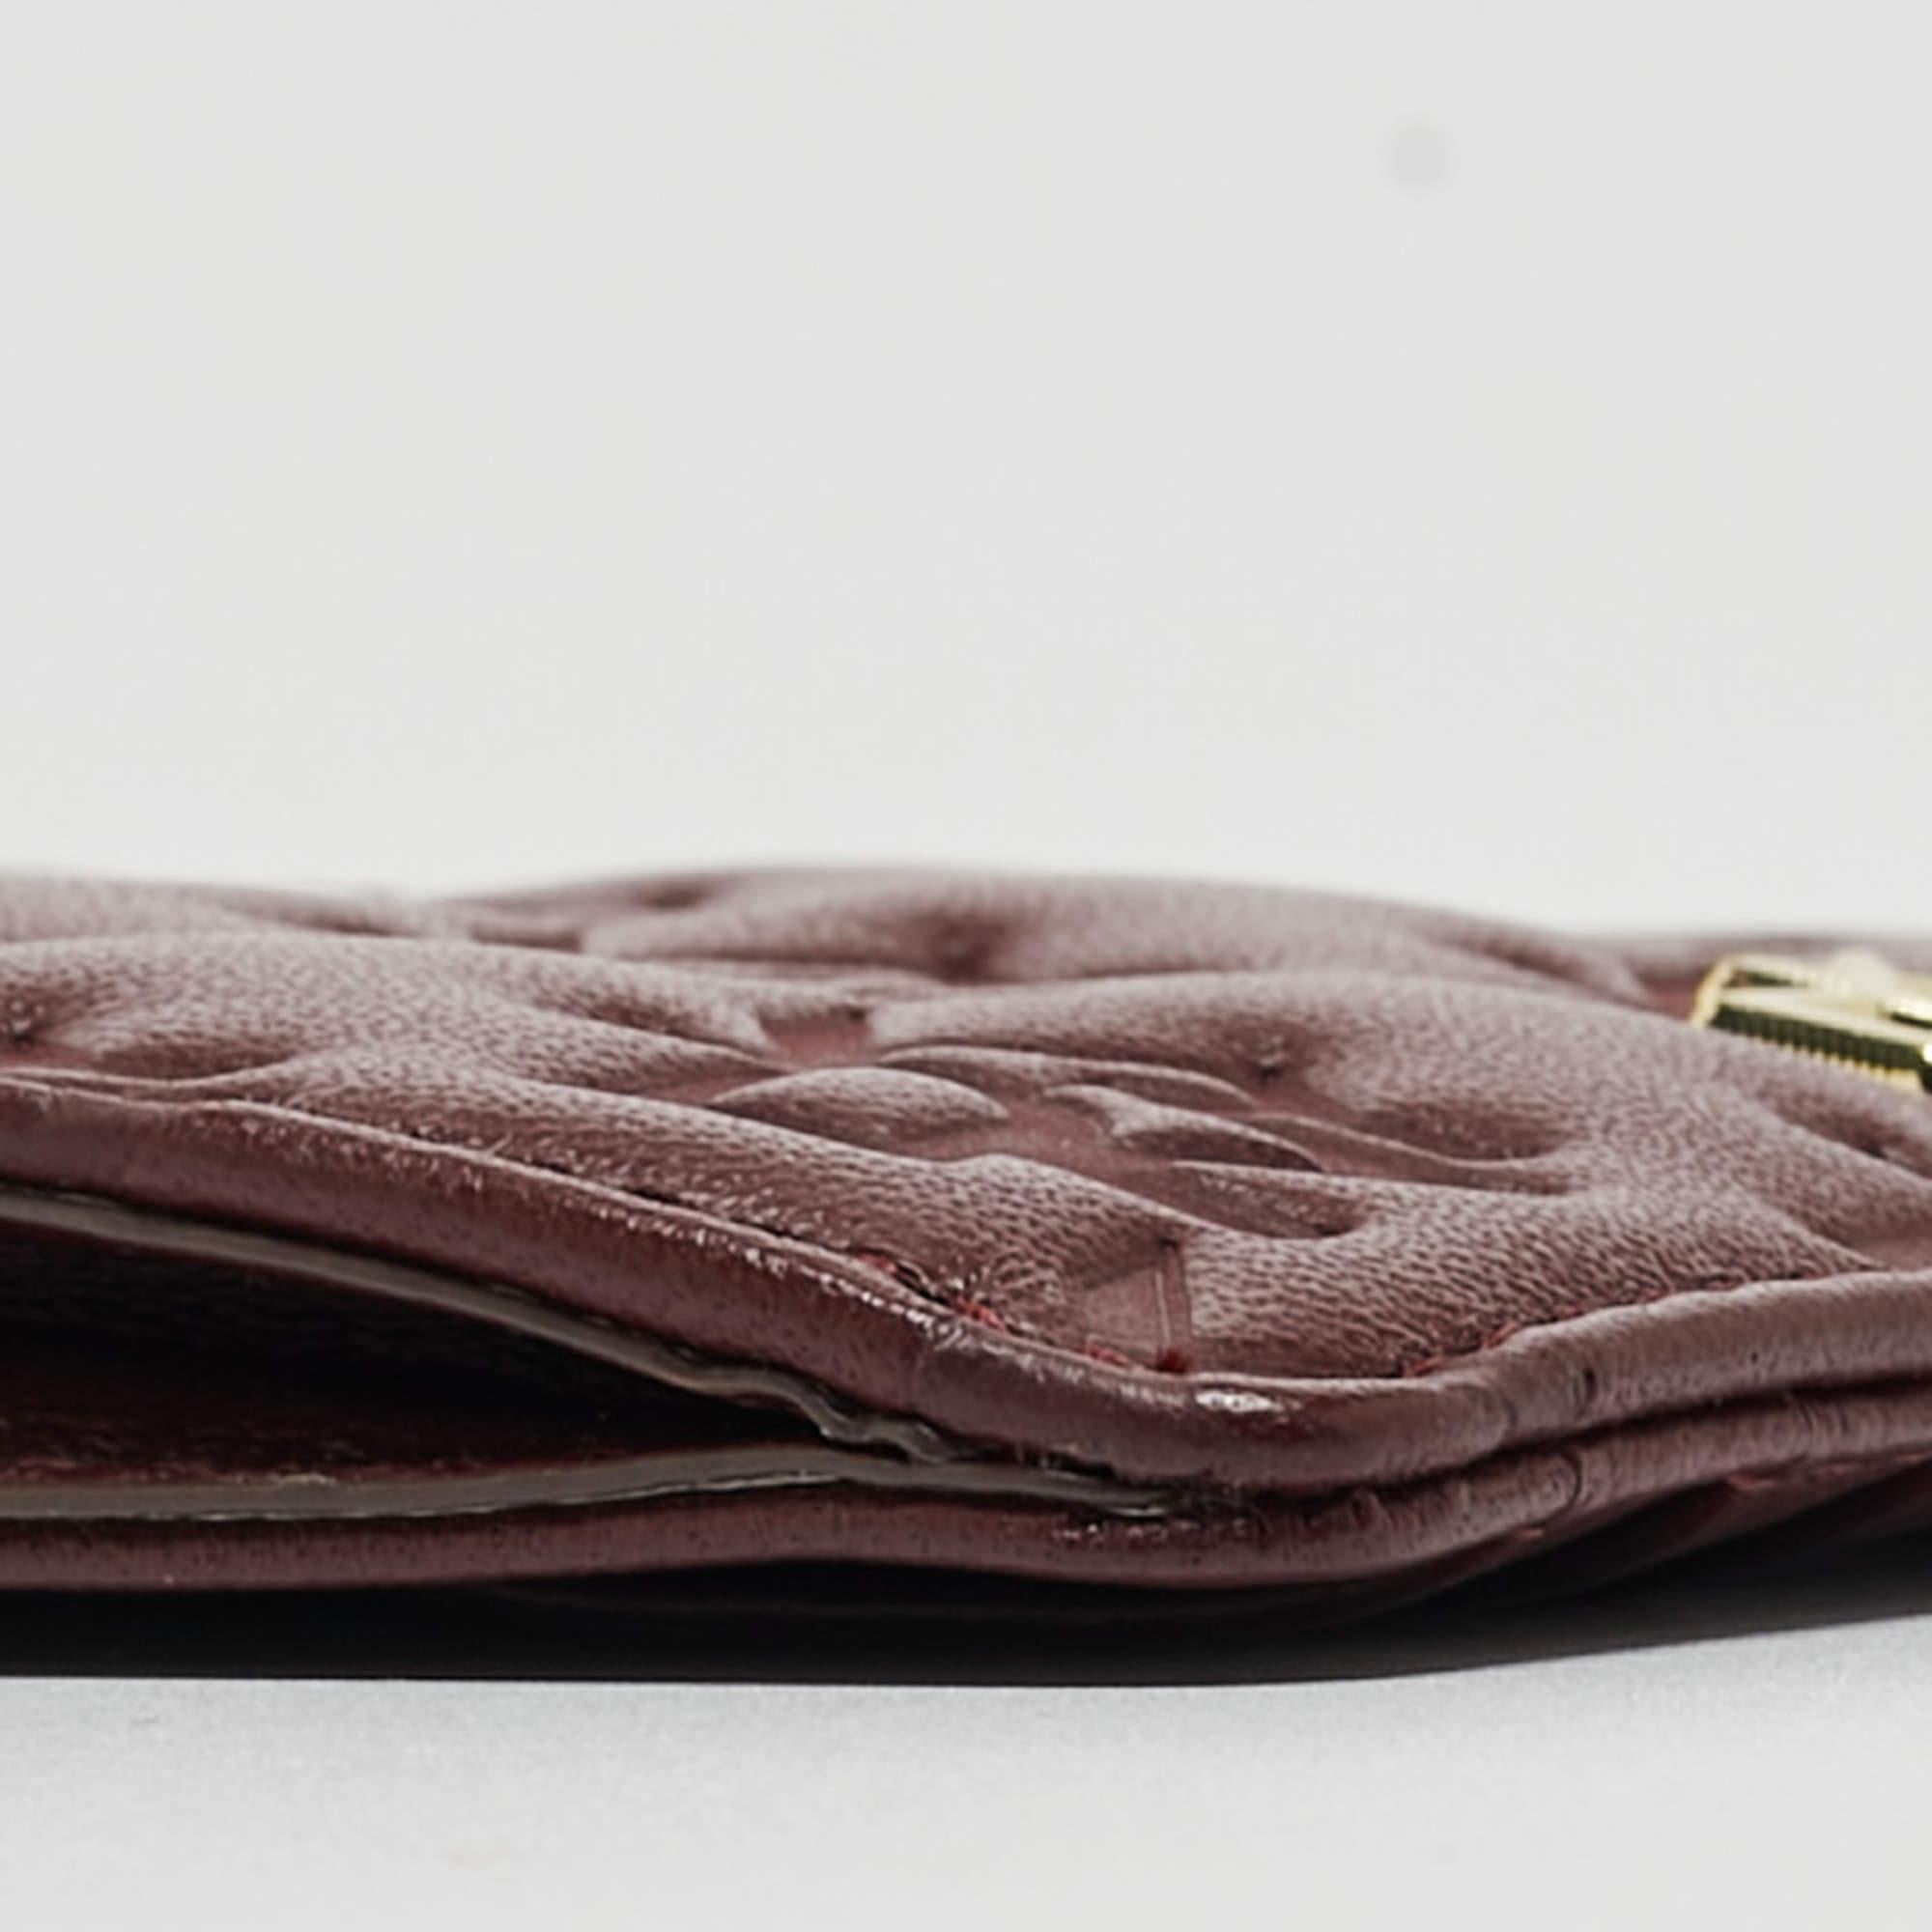 DKNY Burgundy Signature Embossed Leather Catherine Key Card Case For Sale 3